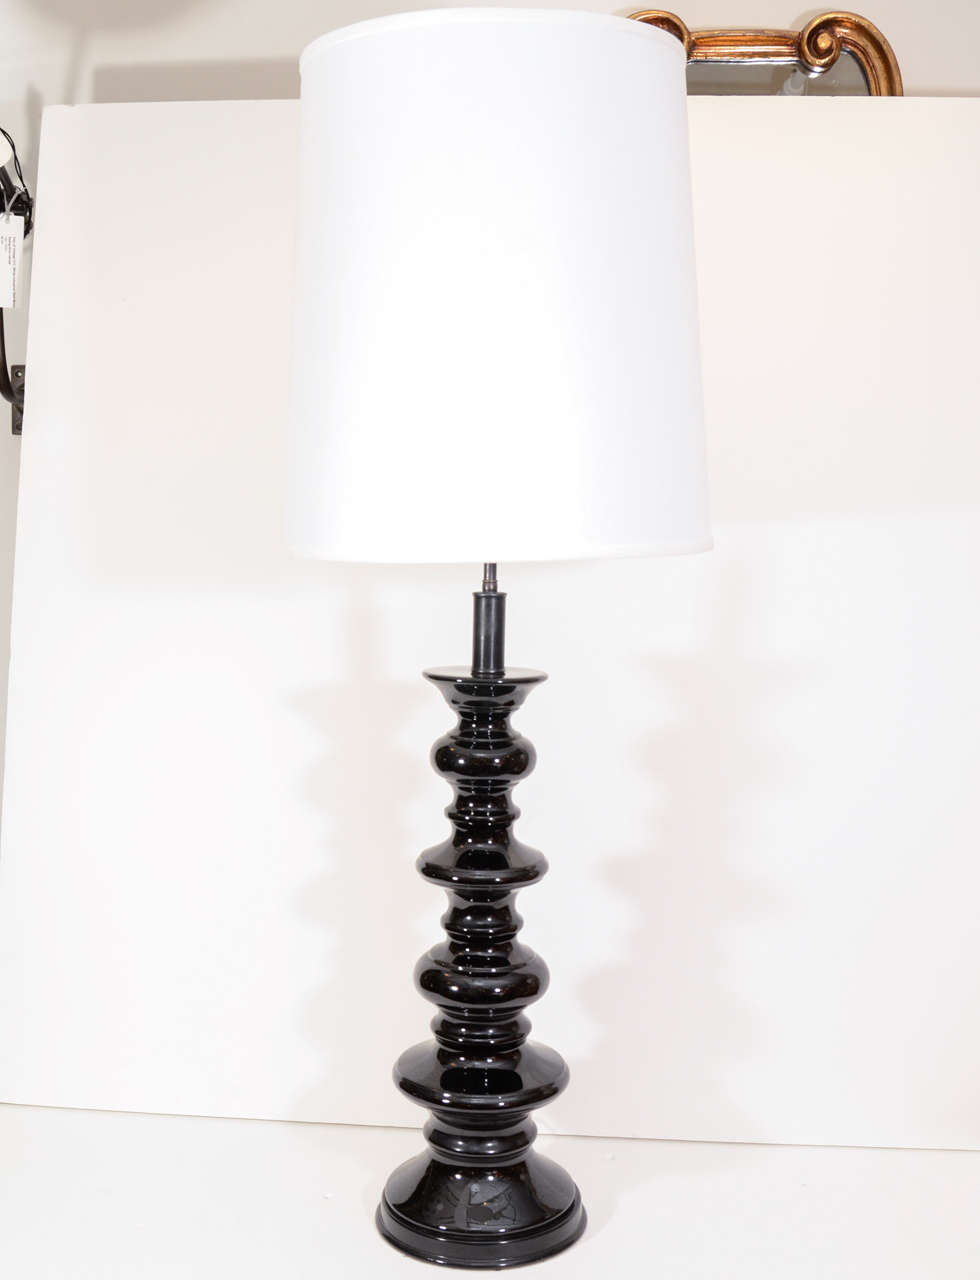 Pair of dramatic glossy black ceramic table lamps.  USA, circa 1950.  Recently restored/rewired.

Dimensions:
39 inch height to finial
22 inch height of ceramic vessel
8 inch base width